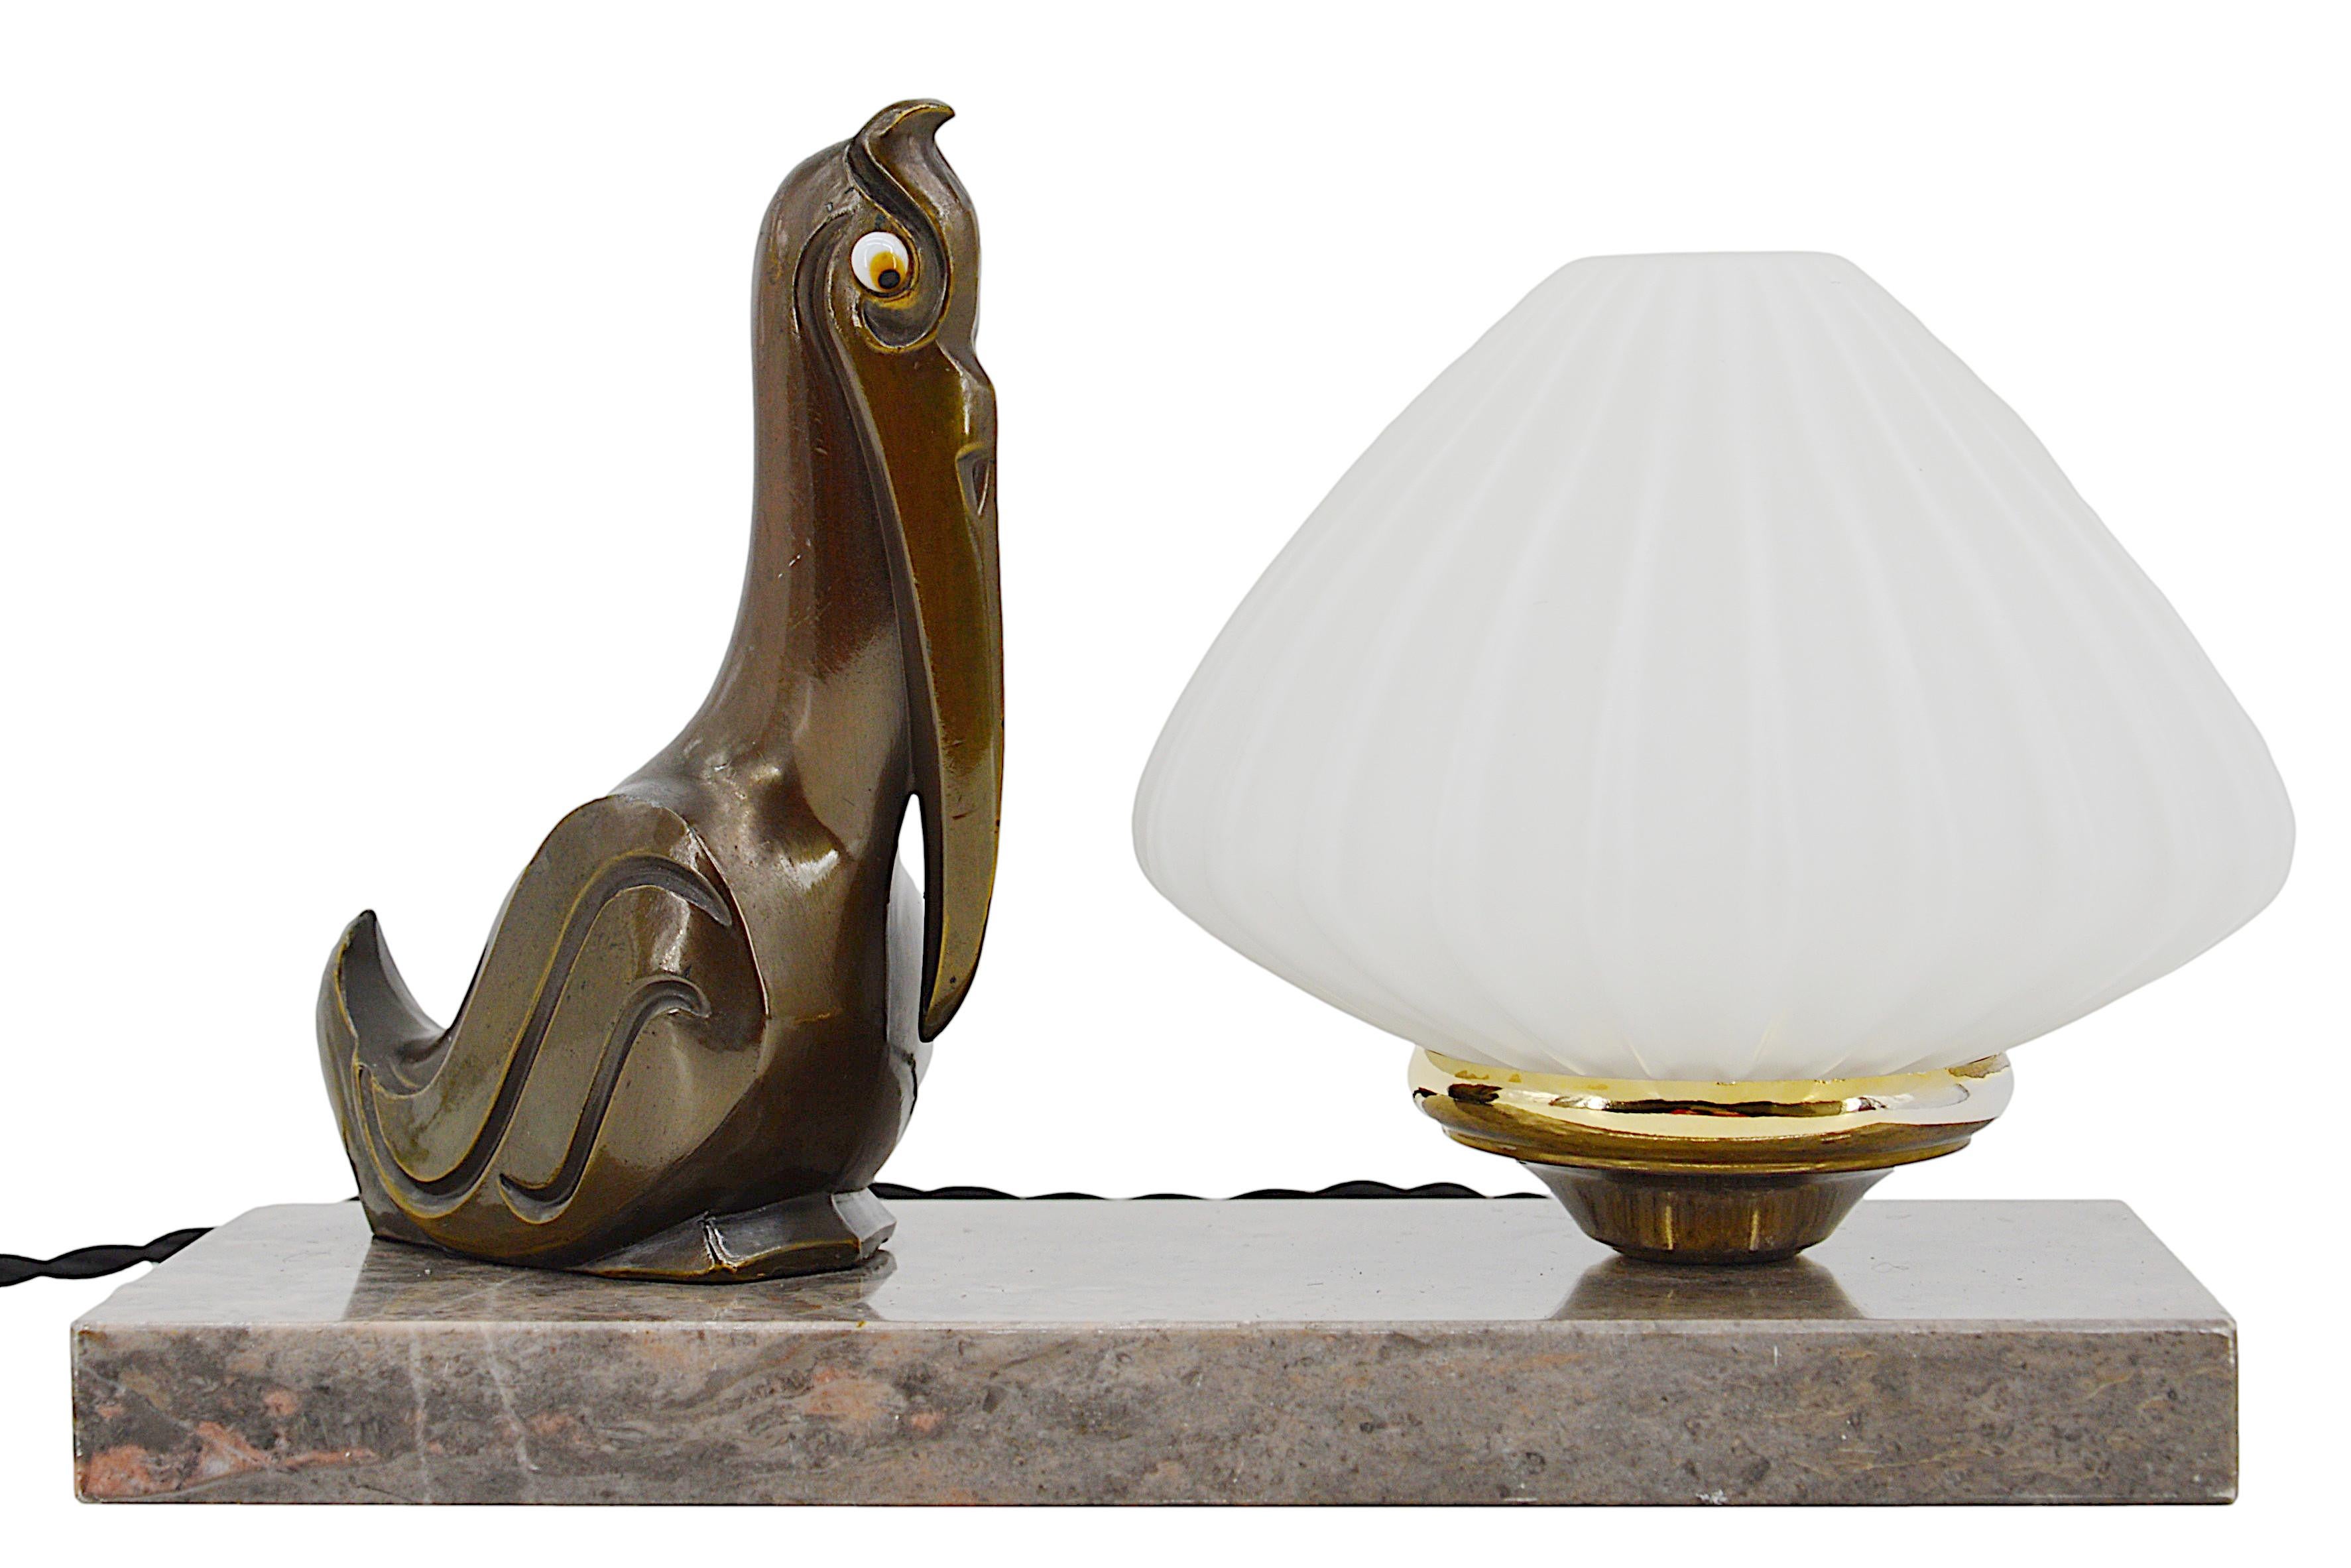 French Art Deco table lamp / night-light, 1930s. Spelter pelican with glass eyes. Double glass lampshade. Marble base. Height : 5.9